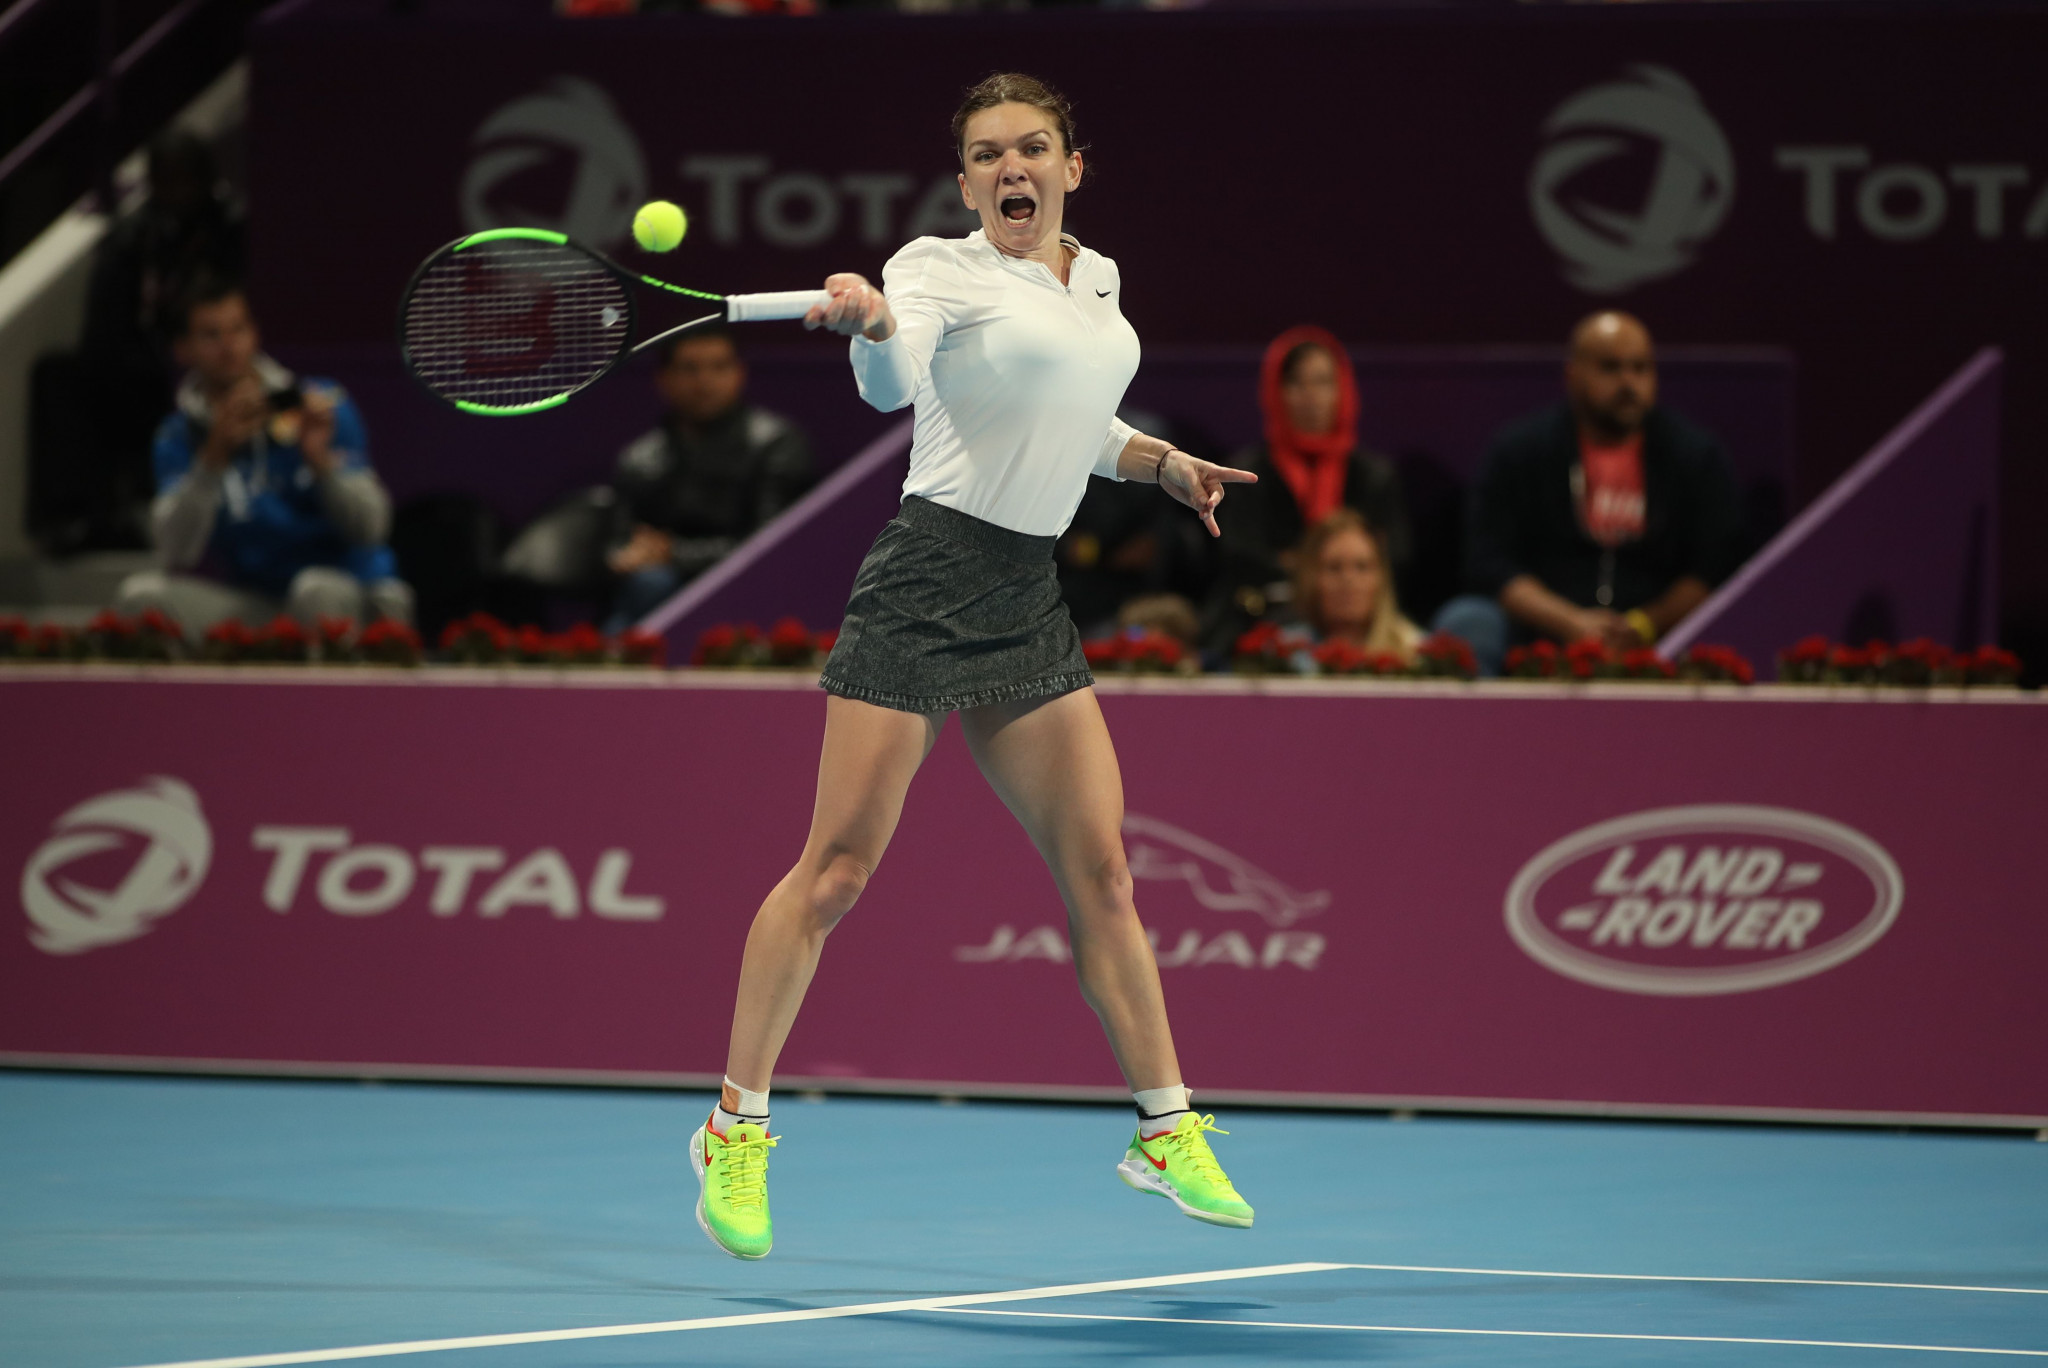 Top seed Simona Halep of Romania progressed to the final of the WTA Qatar Open after winning her semi-final today ©Getty Images